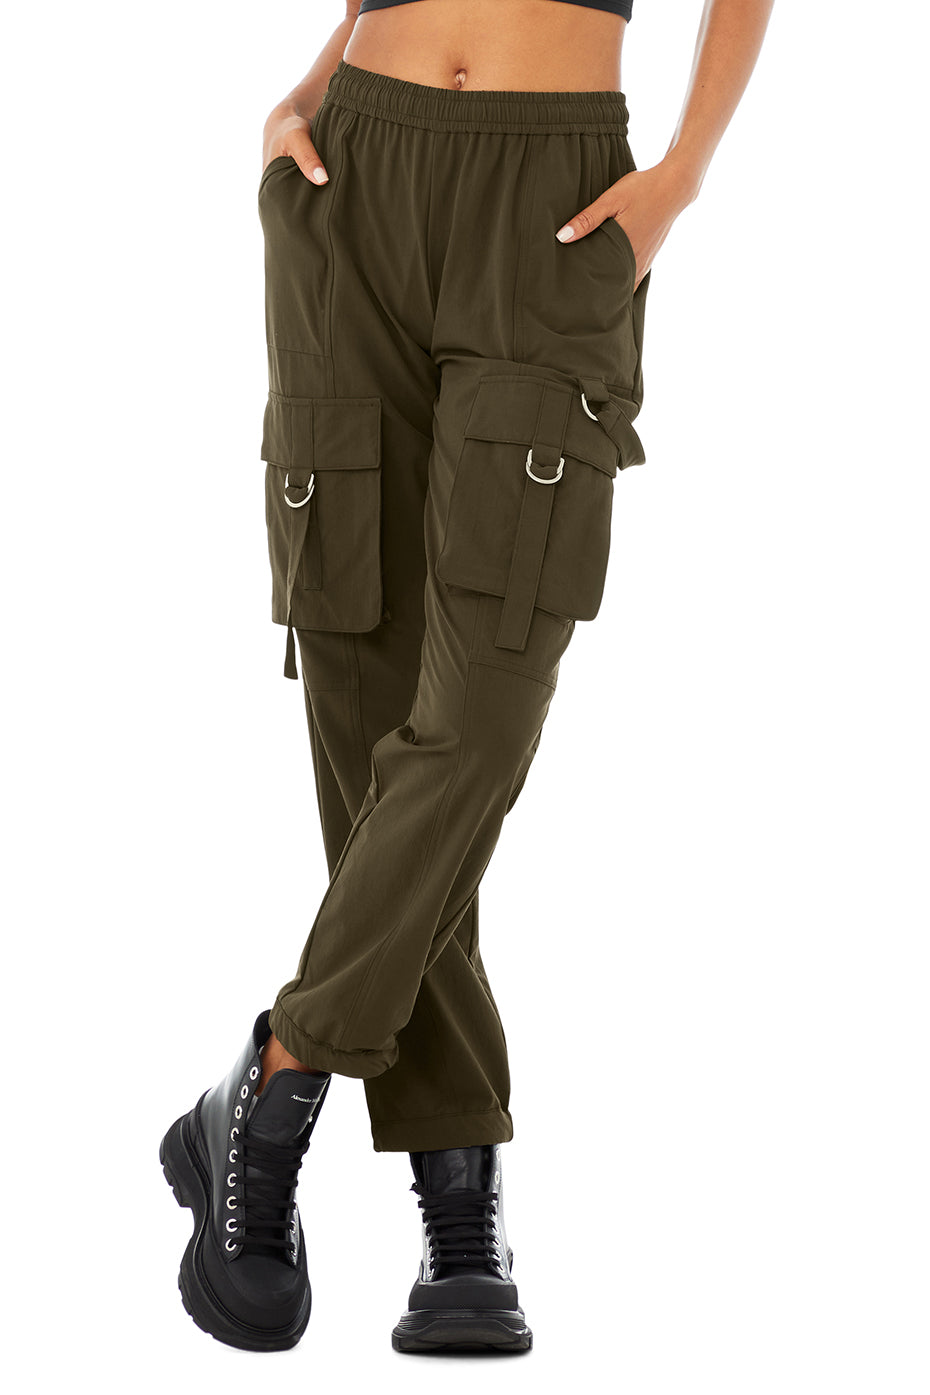 High-Waist City Wise Cargo Pants in Dark Olive by Alo Yoga - Work